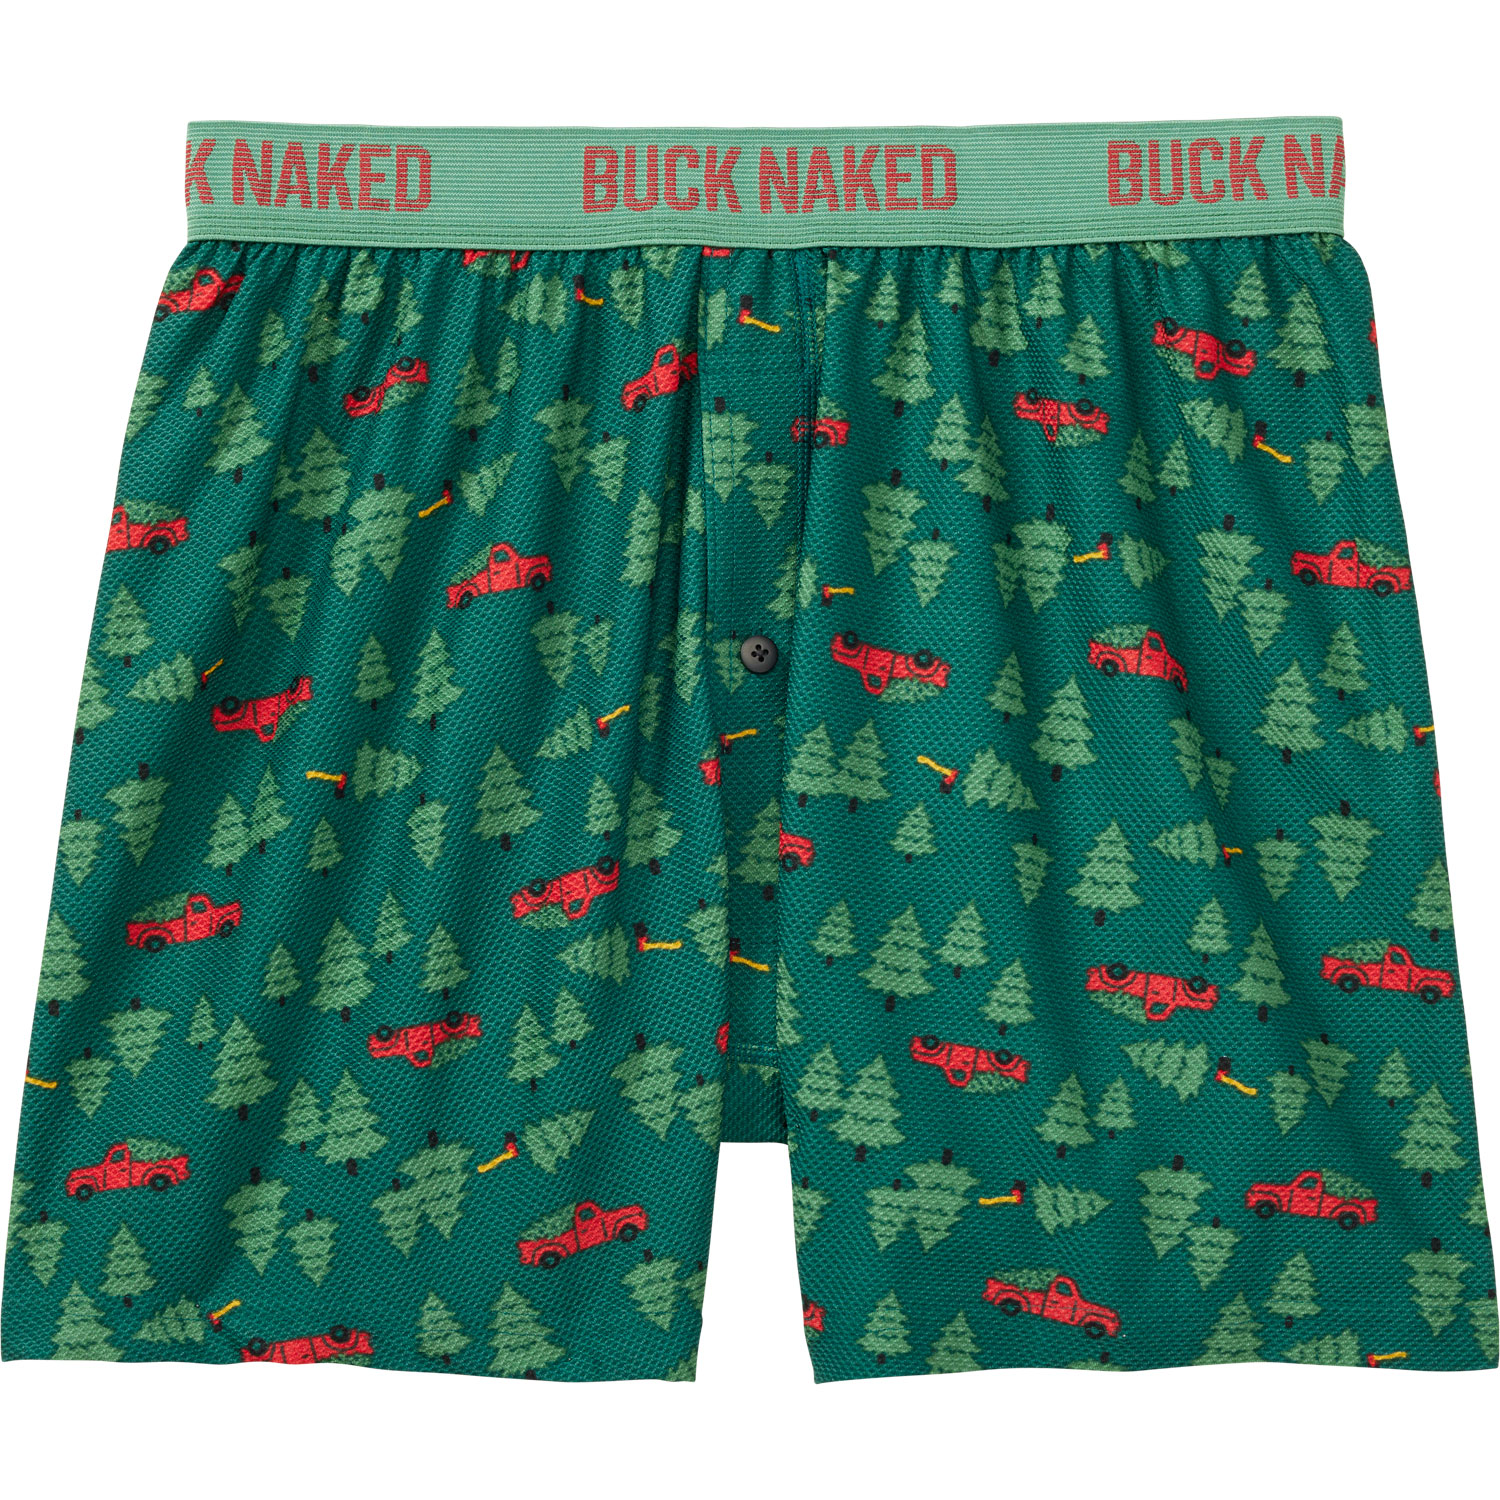 Duluth Trading Company - Go Buck Naked without going broke: this Thursday  and Friday only, get a pair of our Men's Buck Naked Underwear for just $16.  Regularly priced at $22.50. Plus